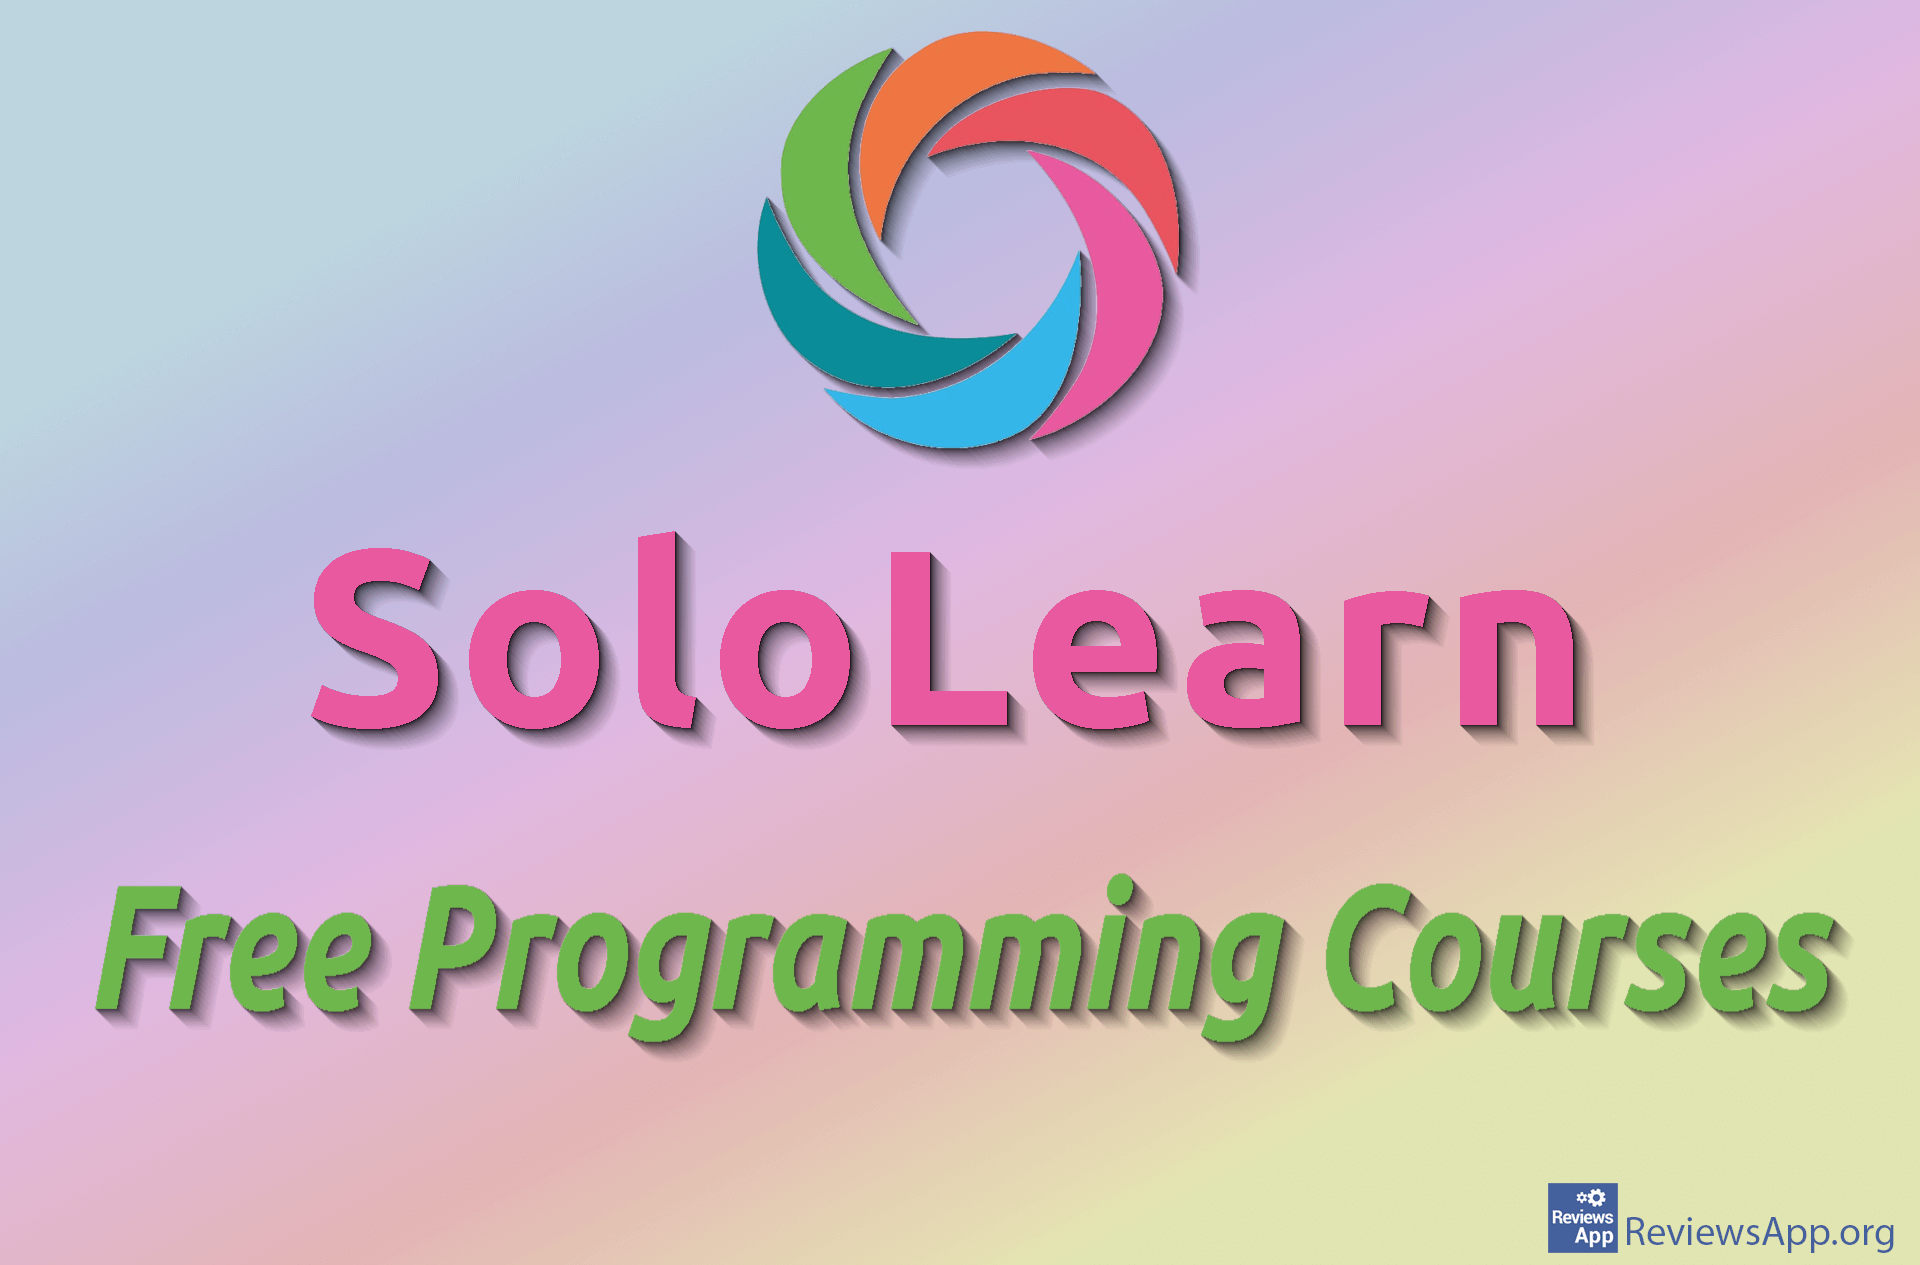 SoloLearn – Free Programming Courses